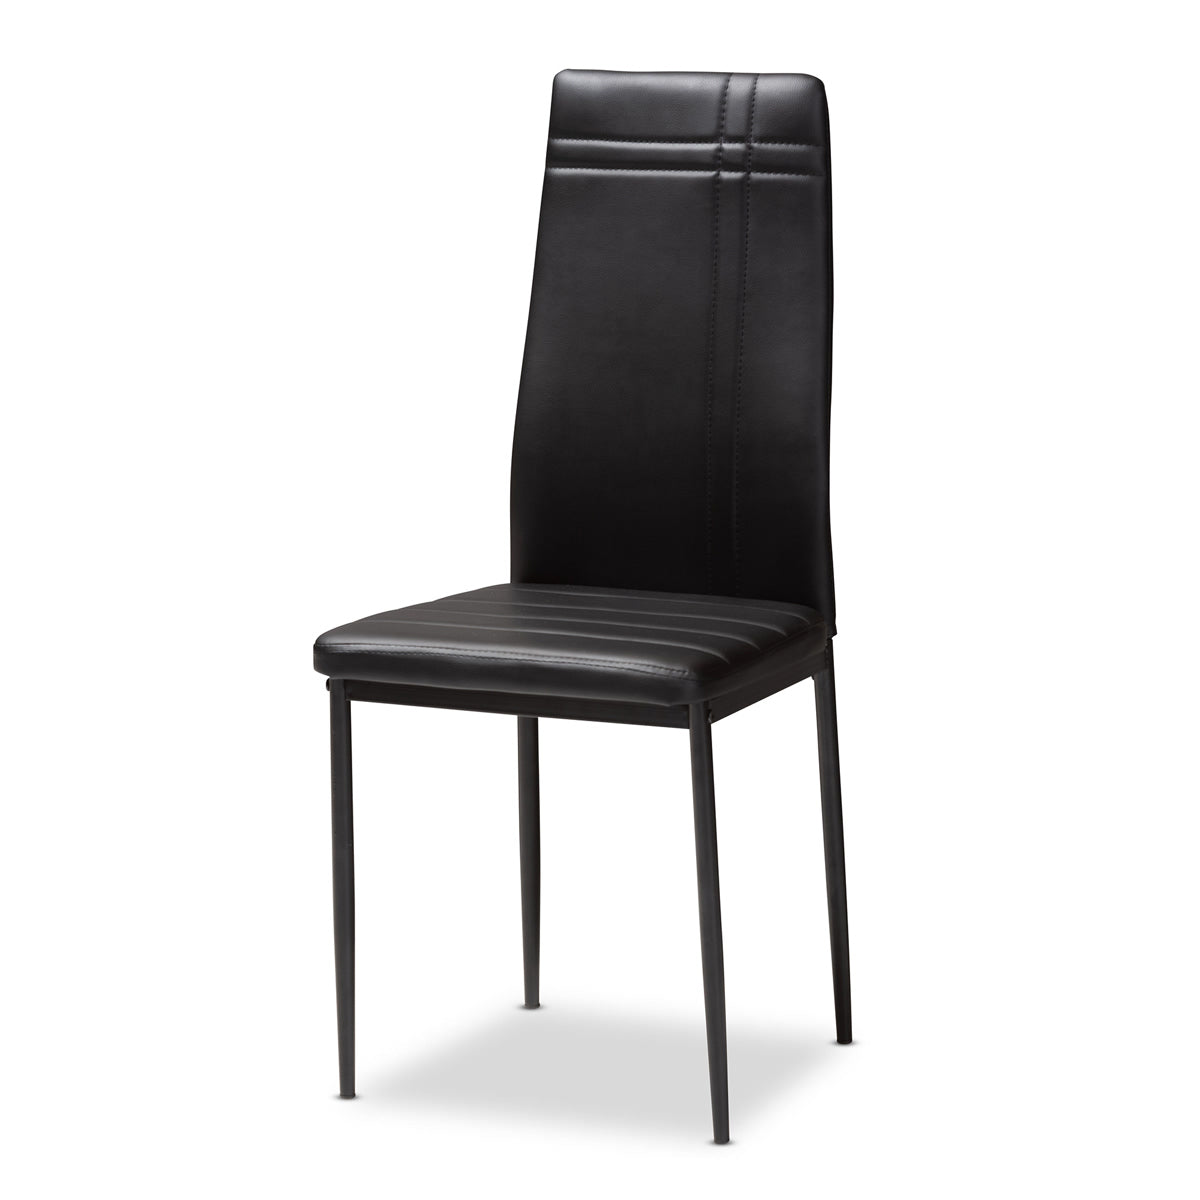 Baxton Studio Matiese Modern and Contemporary Black Faux Leather Upholstered Dining Chair (Set of 4) Baxton Studio-dining chair-Minimal And Modern - 2